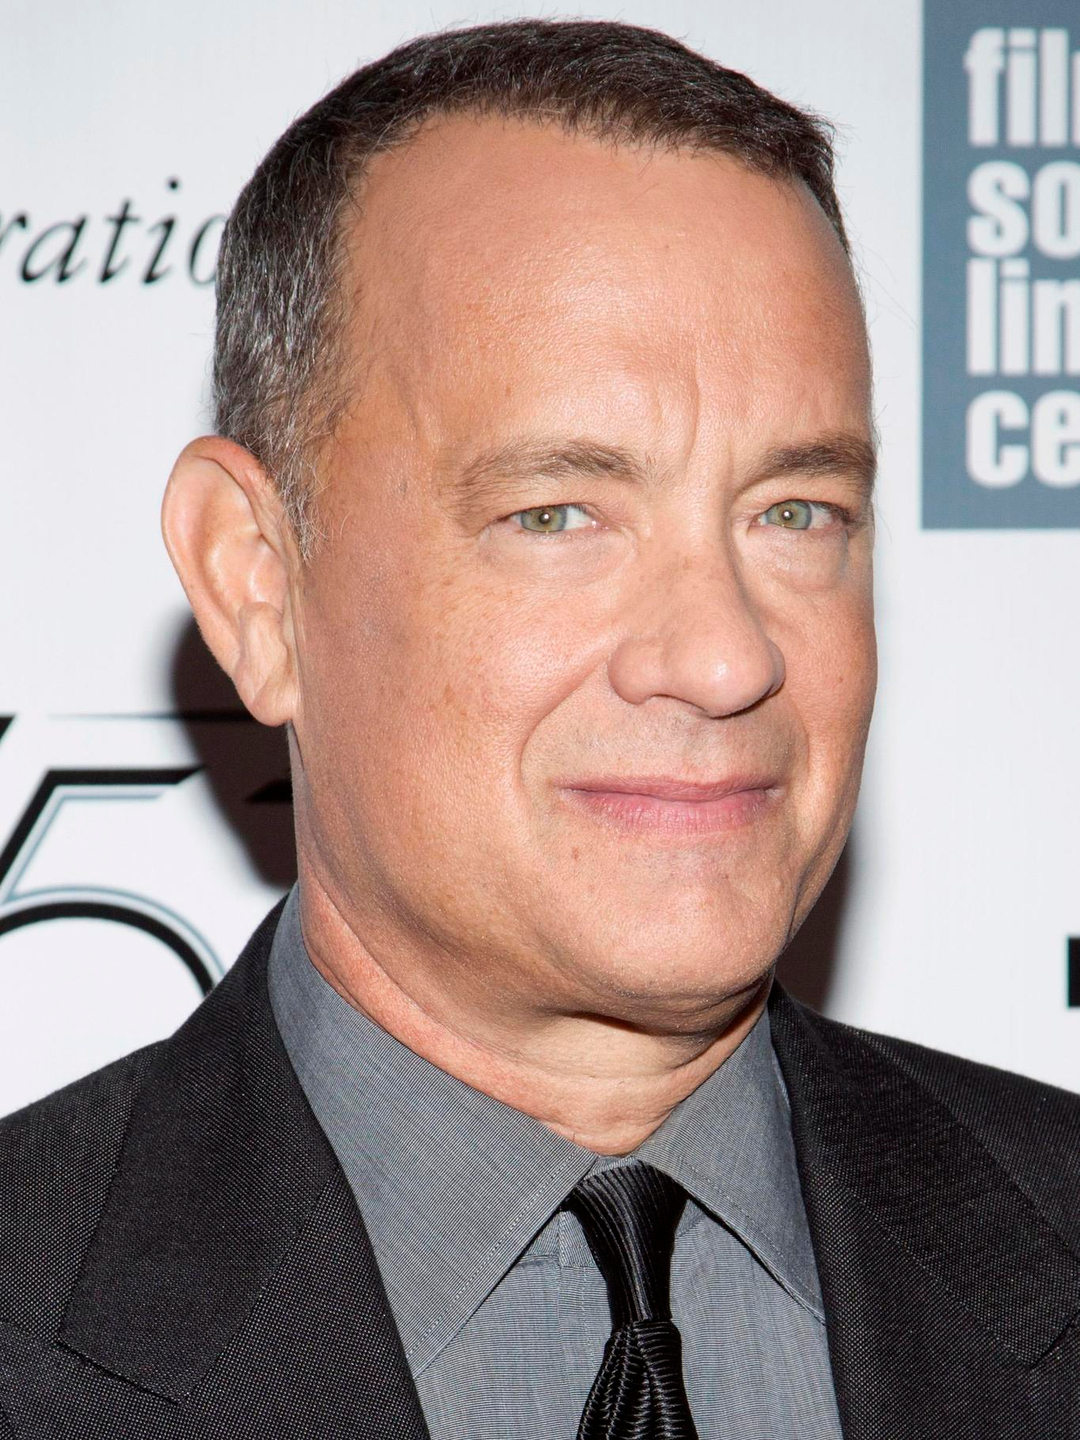 Tom Hanks young age